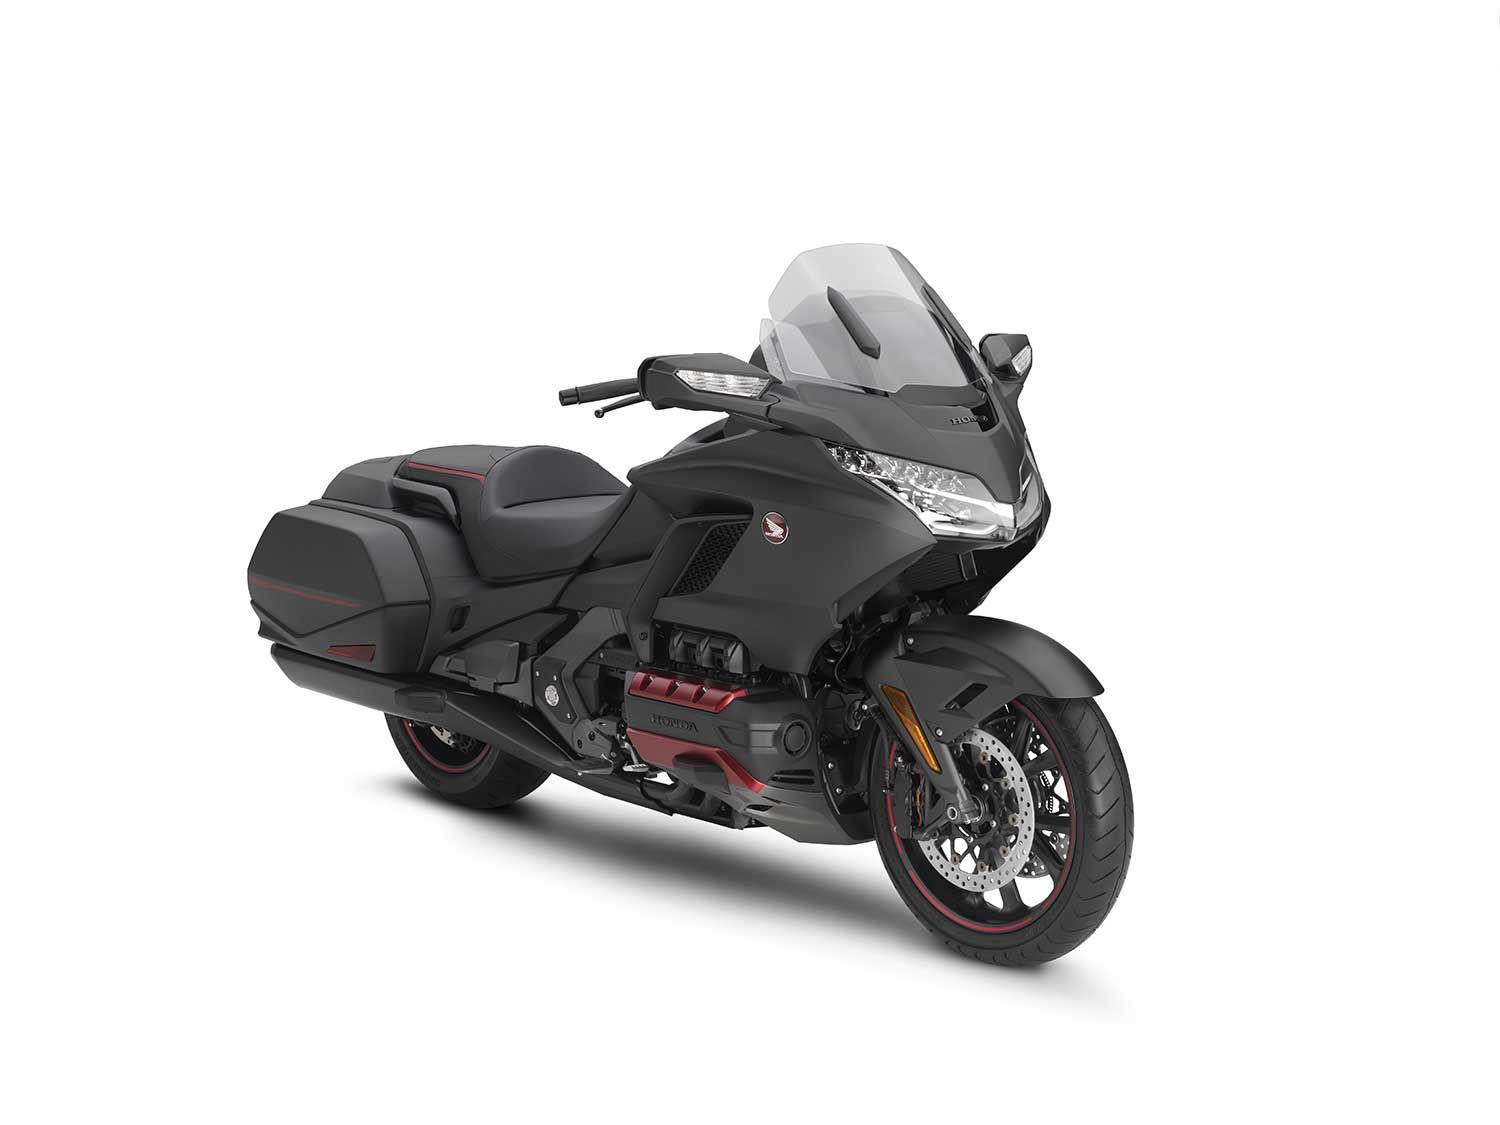 Luxury touring takes cash, there’s no way around that. But Honda’s Gold Wing provides such a smooth, comfortable ride that the cost is worth it.